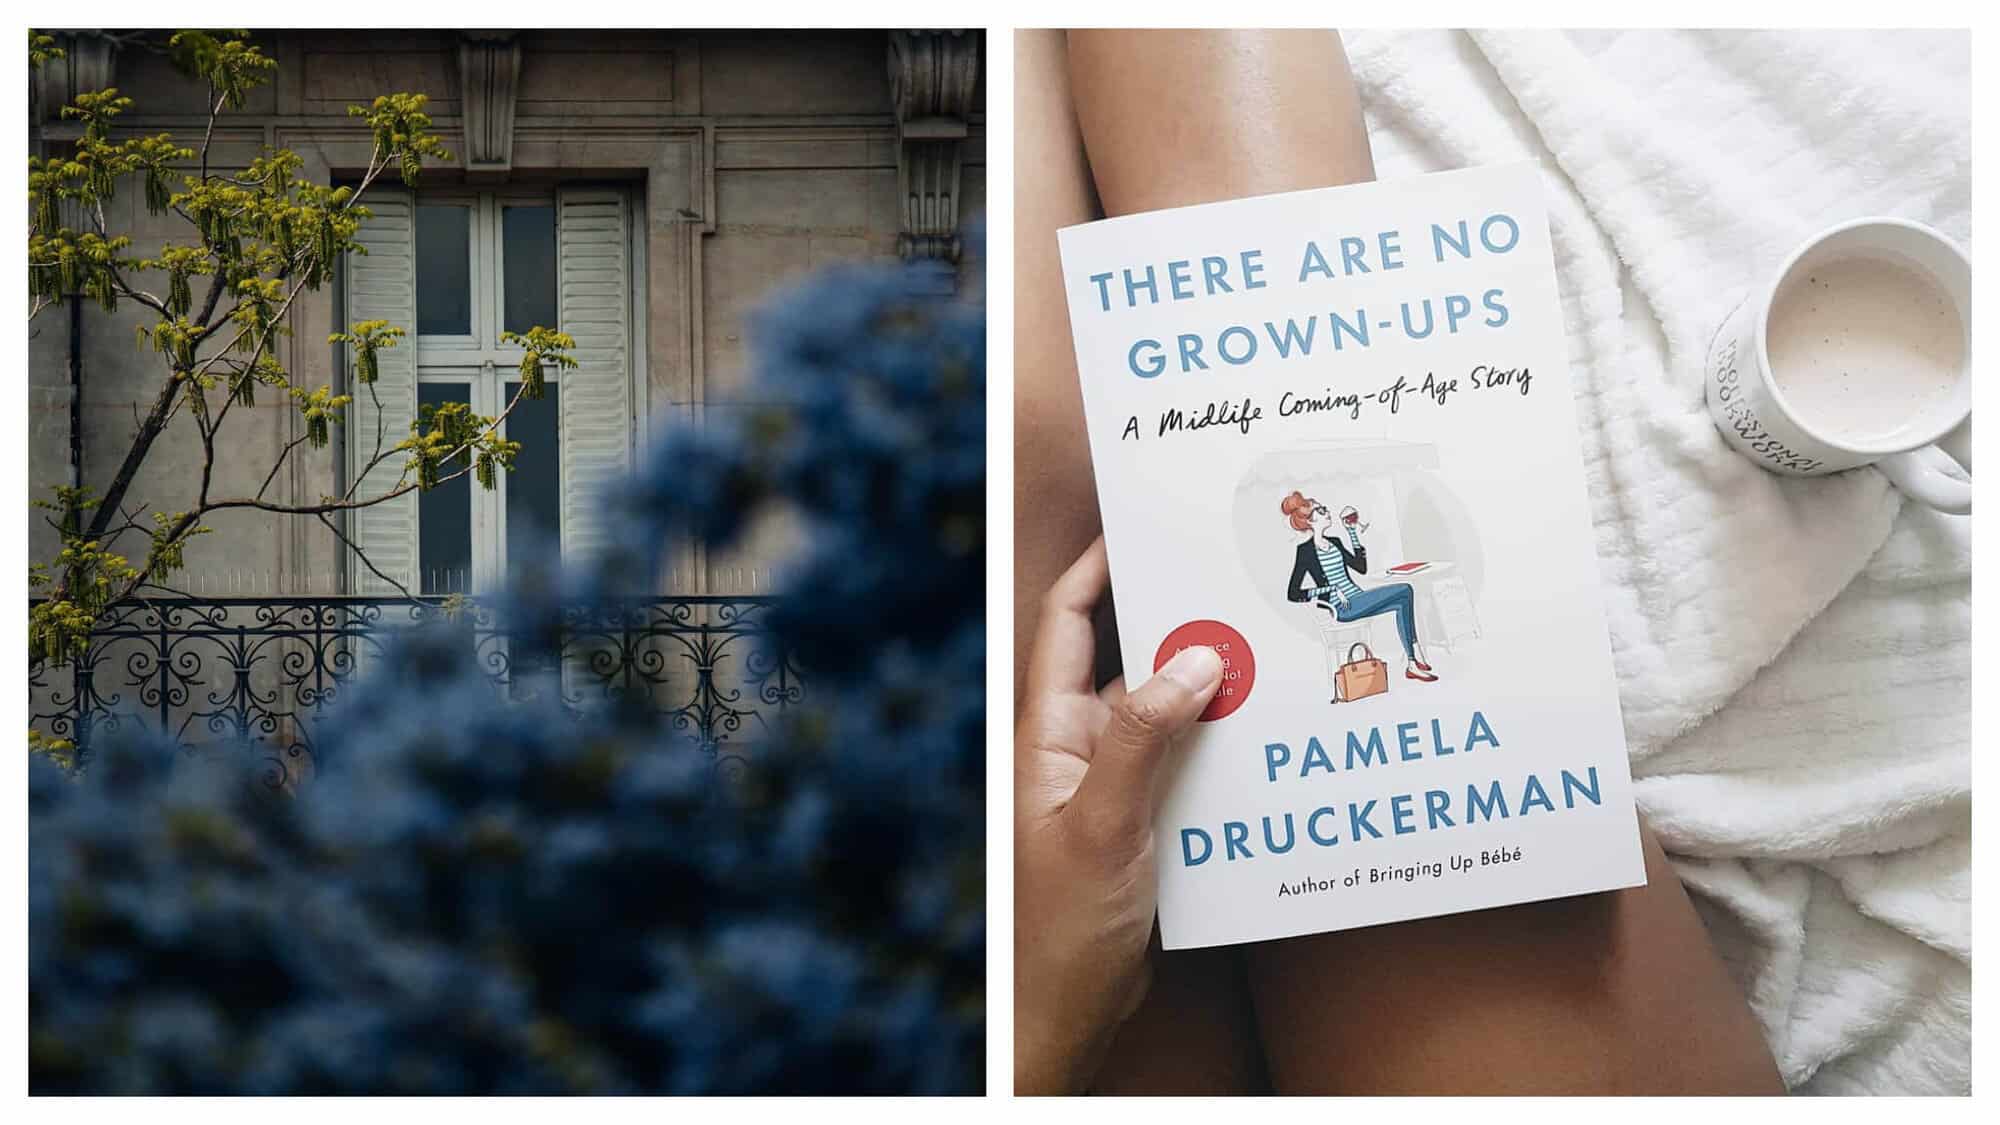 Left: A window and flowers outside of a traditional Parisian building. Right: There are no Grown-ups by Pamela Druckerman.